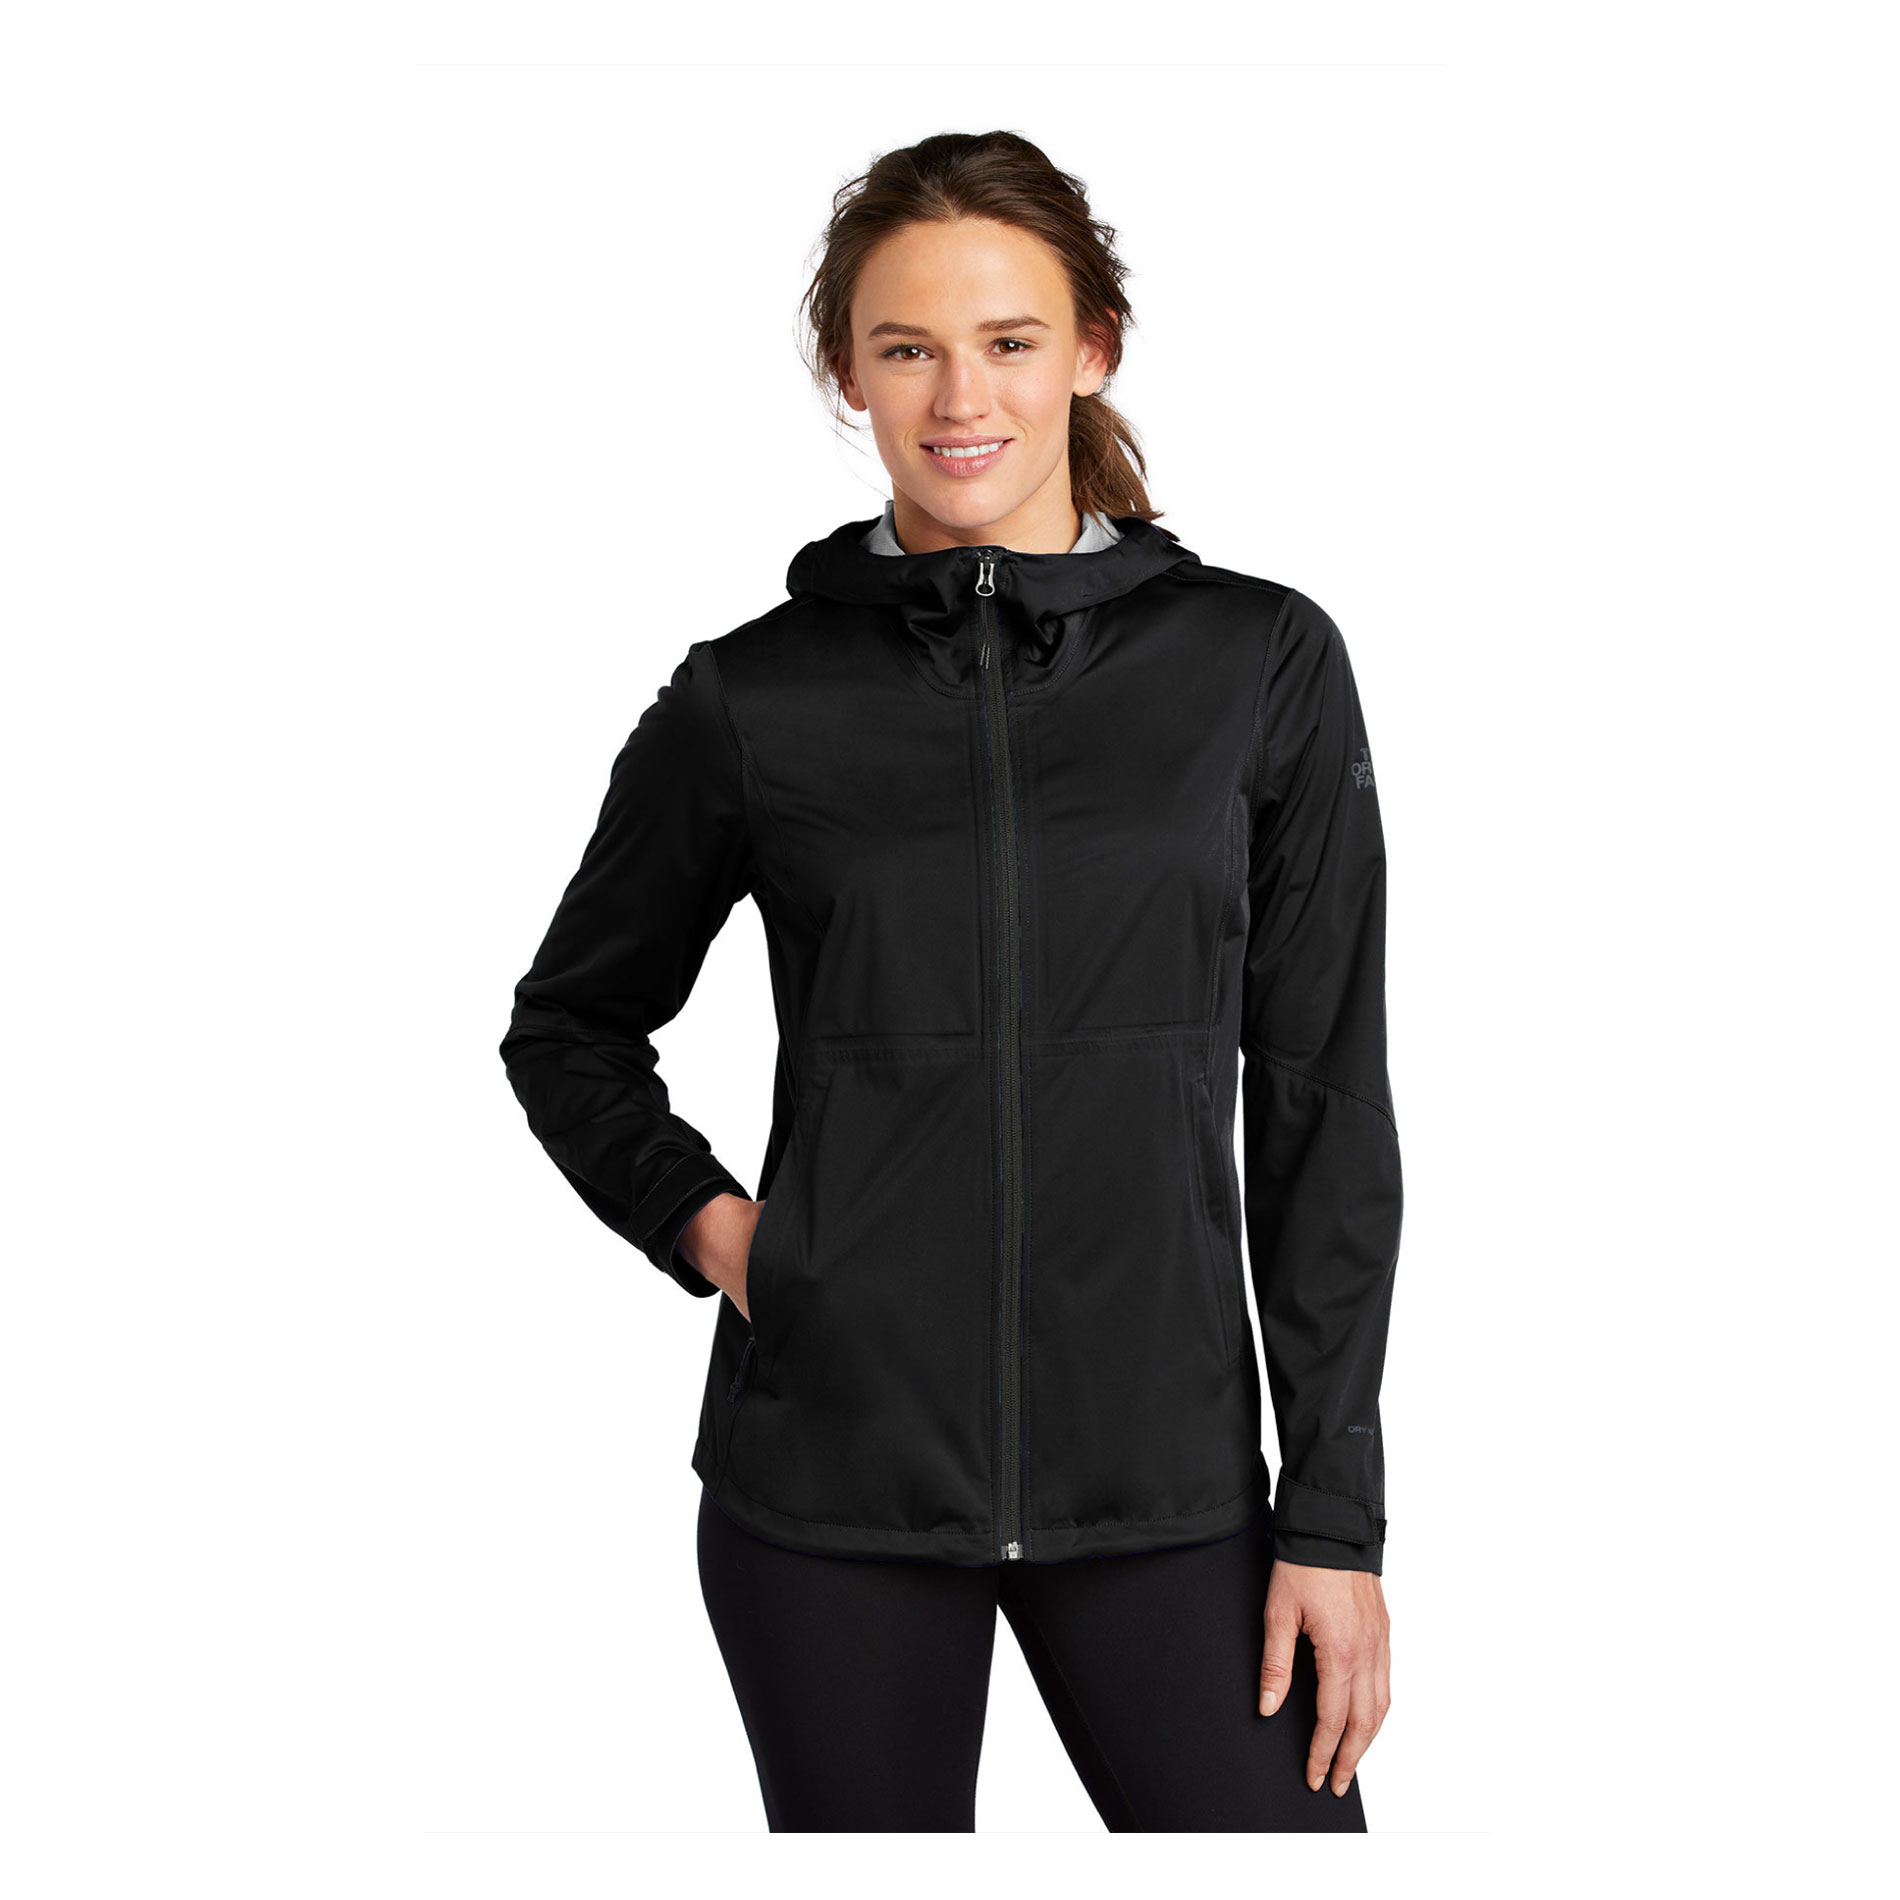 Ninety Swag Shop: The North Face Ladies All-Weather DryVent Jacket